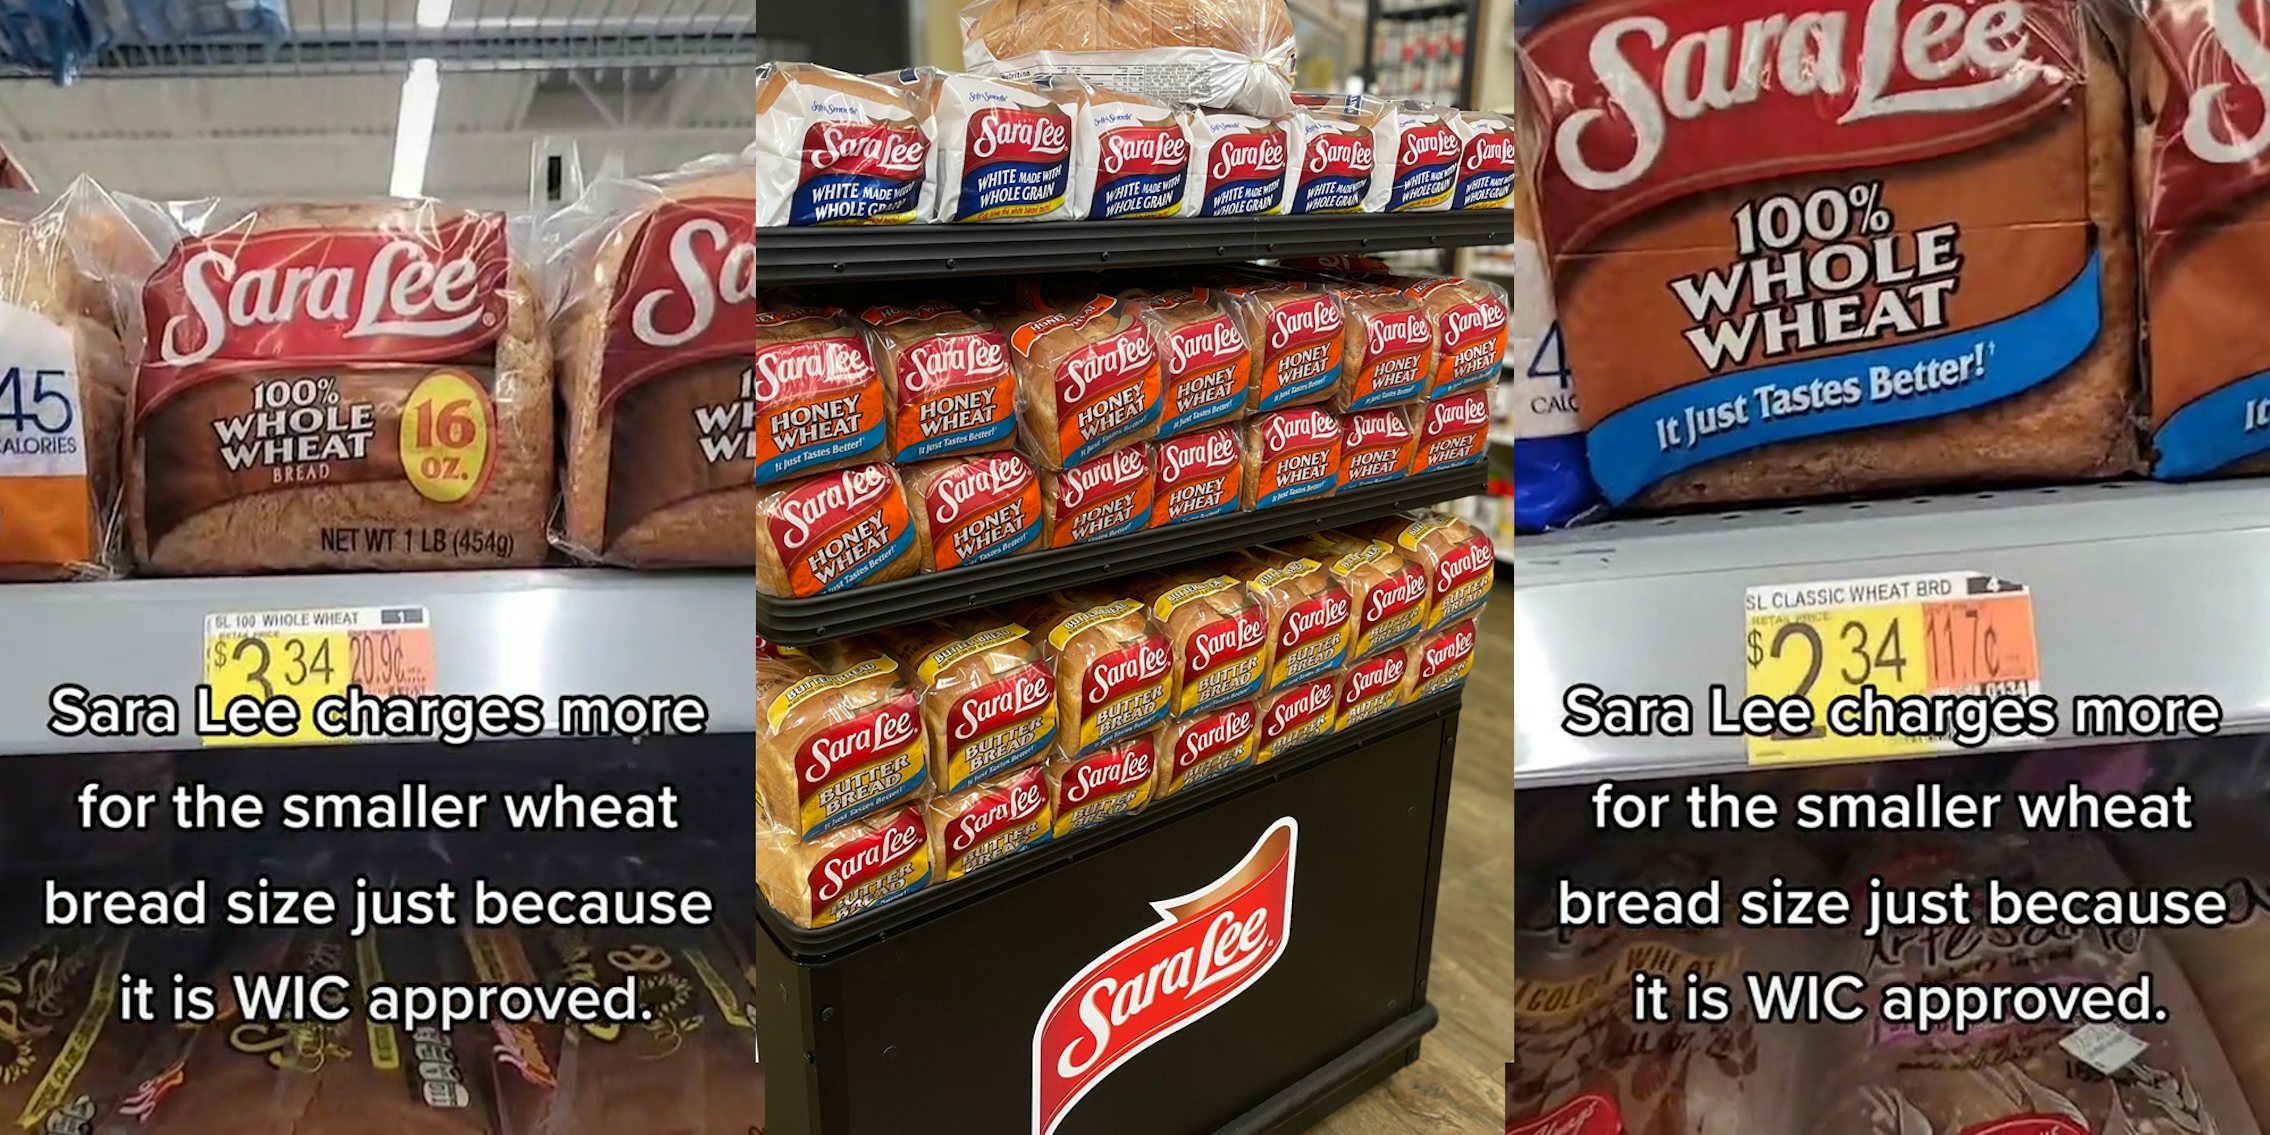 Sara Lee bread on shelf with caption 'Sara Lee charges more for the smaller wheat bread size just because it is WIC approved.' (l) Sara Lee bread on display (c) Sara Lee bread on shelf with caption 'Sara Lee charges more for the smaller wheat bread size just because it is WIC approved.' (r)